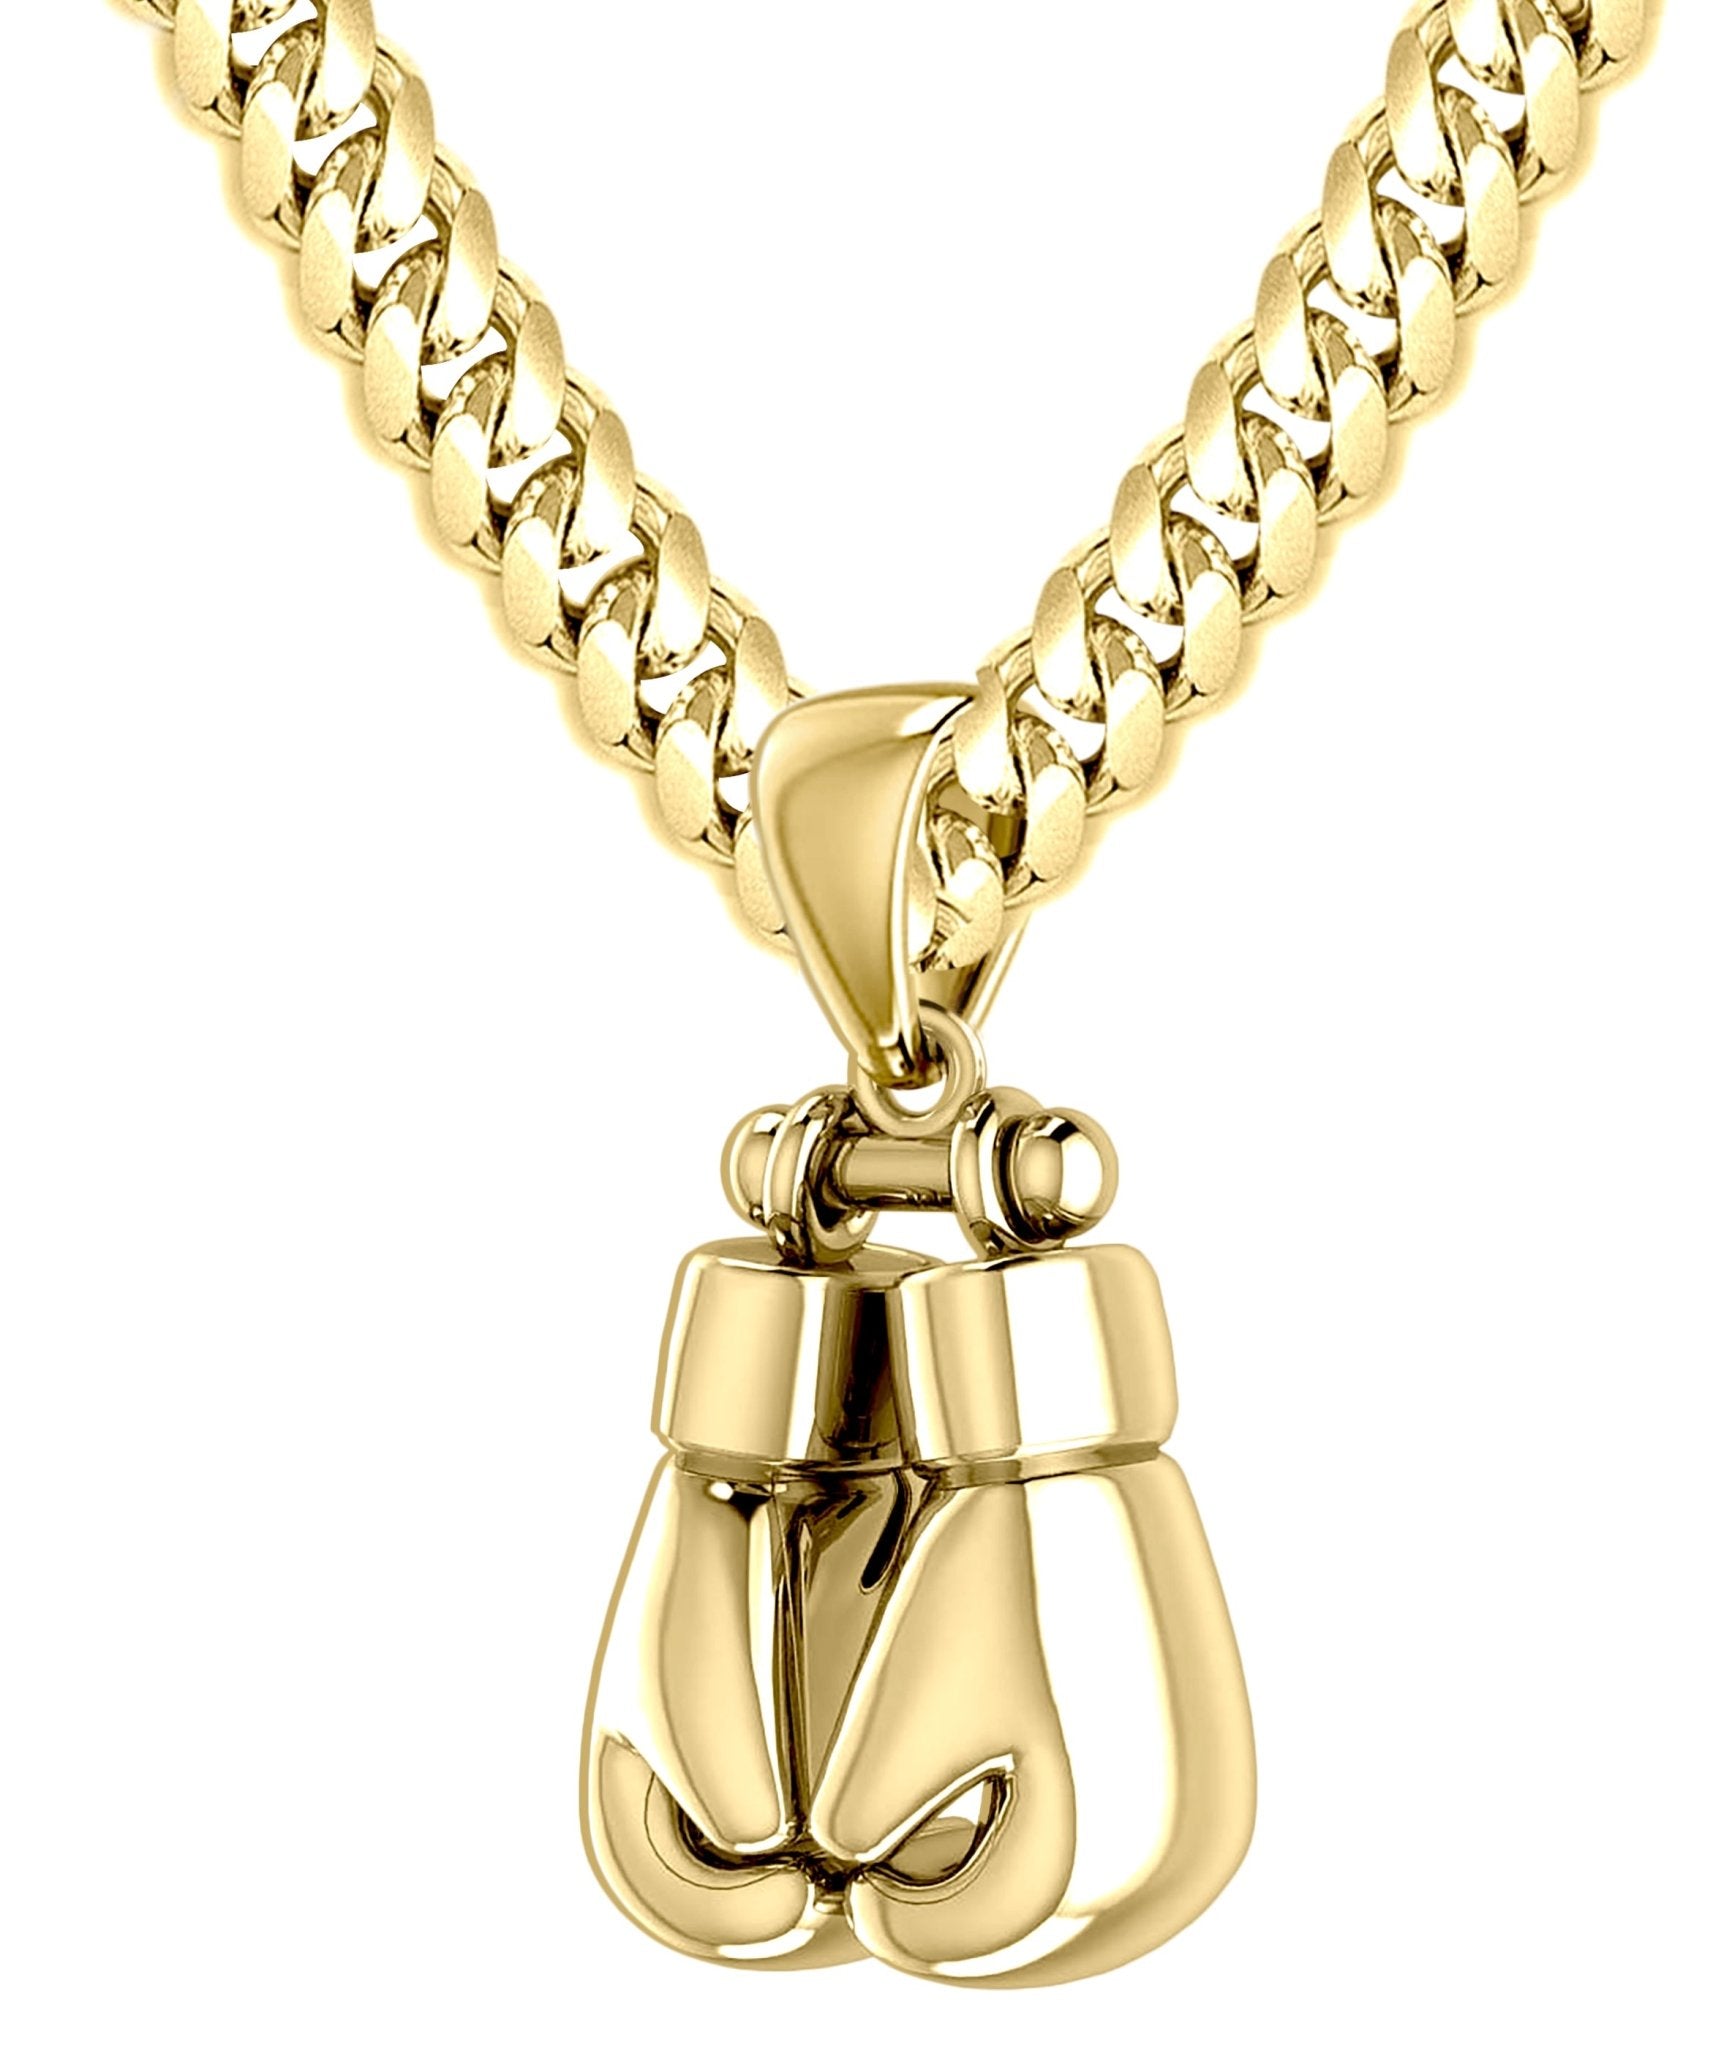 32mm 3D 14k Yellow Double Boxing Glove Pendant Necklace, 67g! - US Jewels